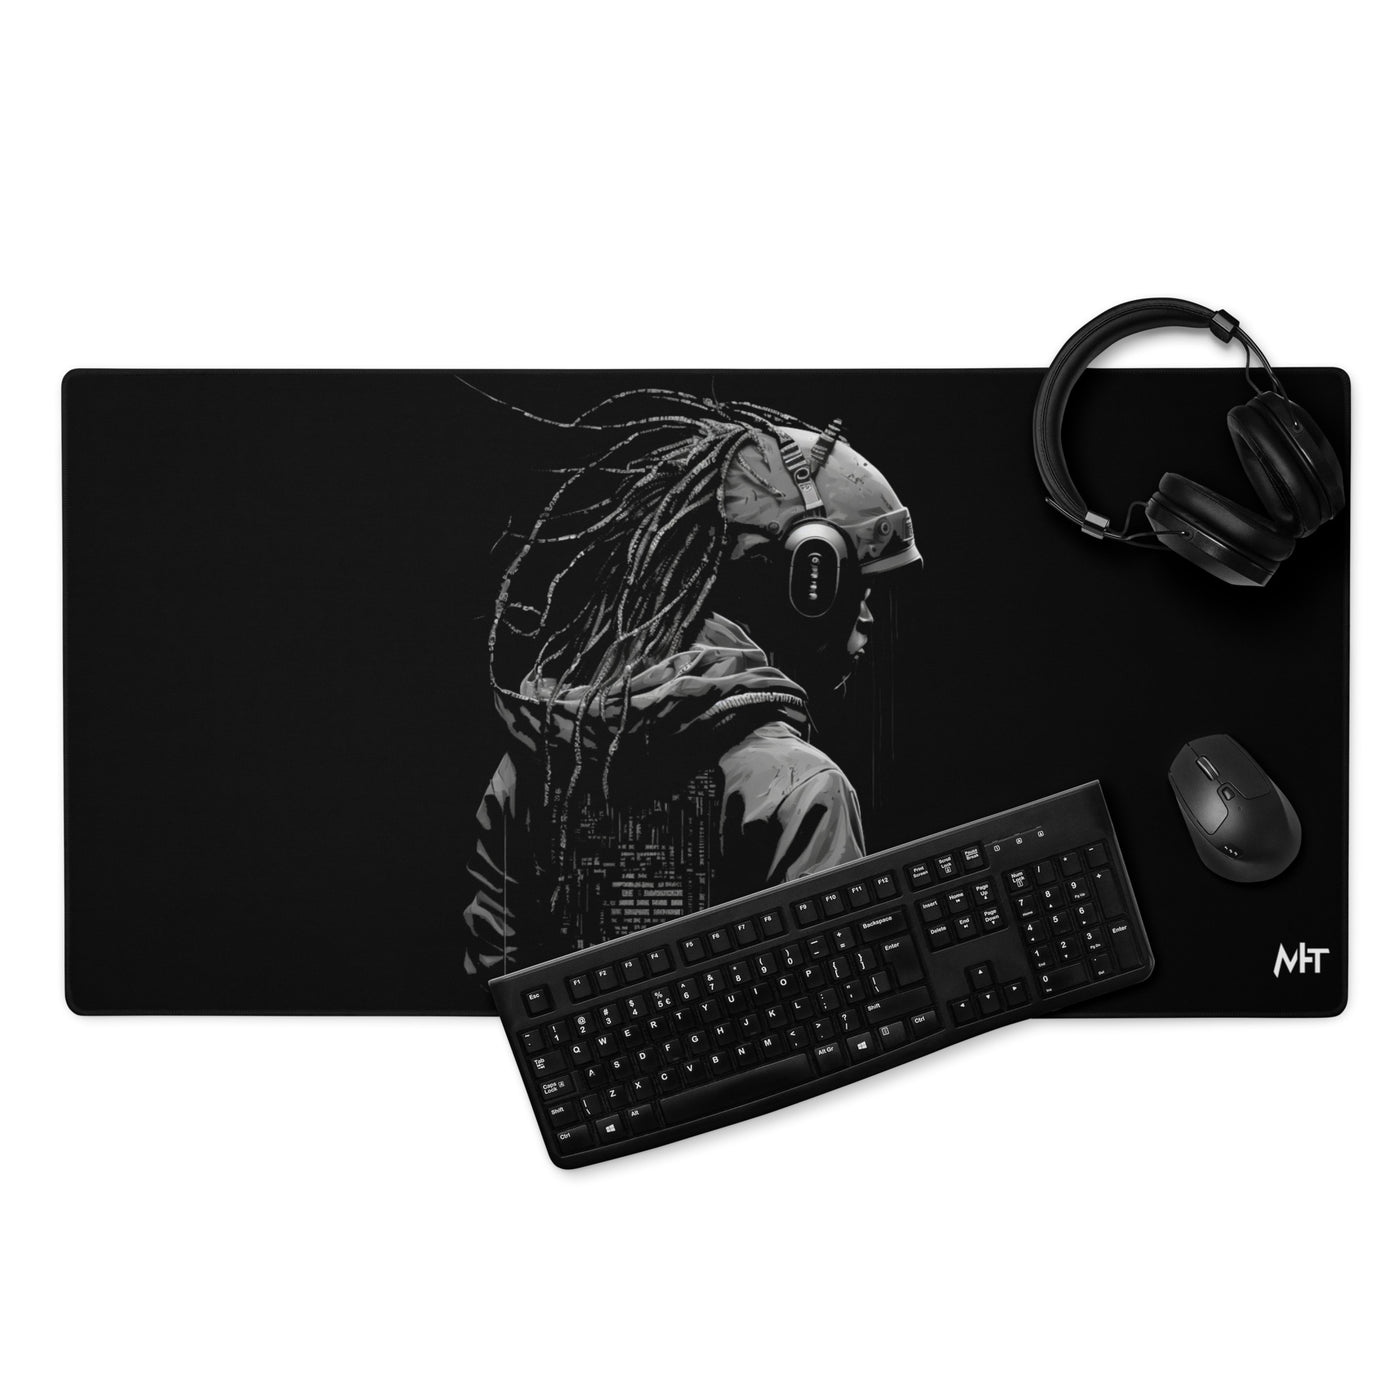 Cyberware assassin v40 - Gaming mouse pad